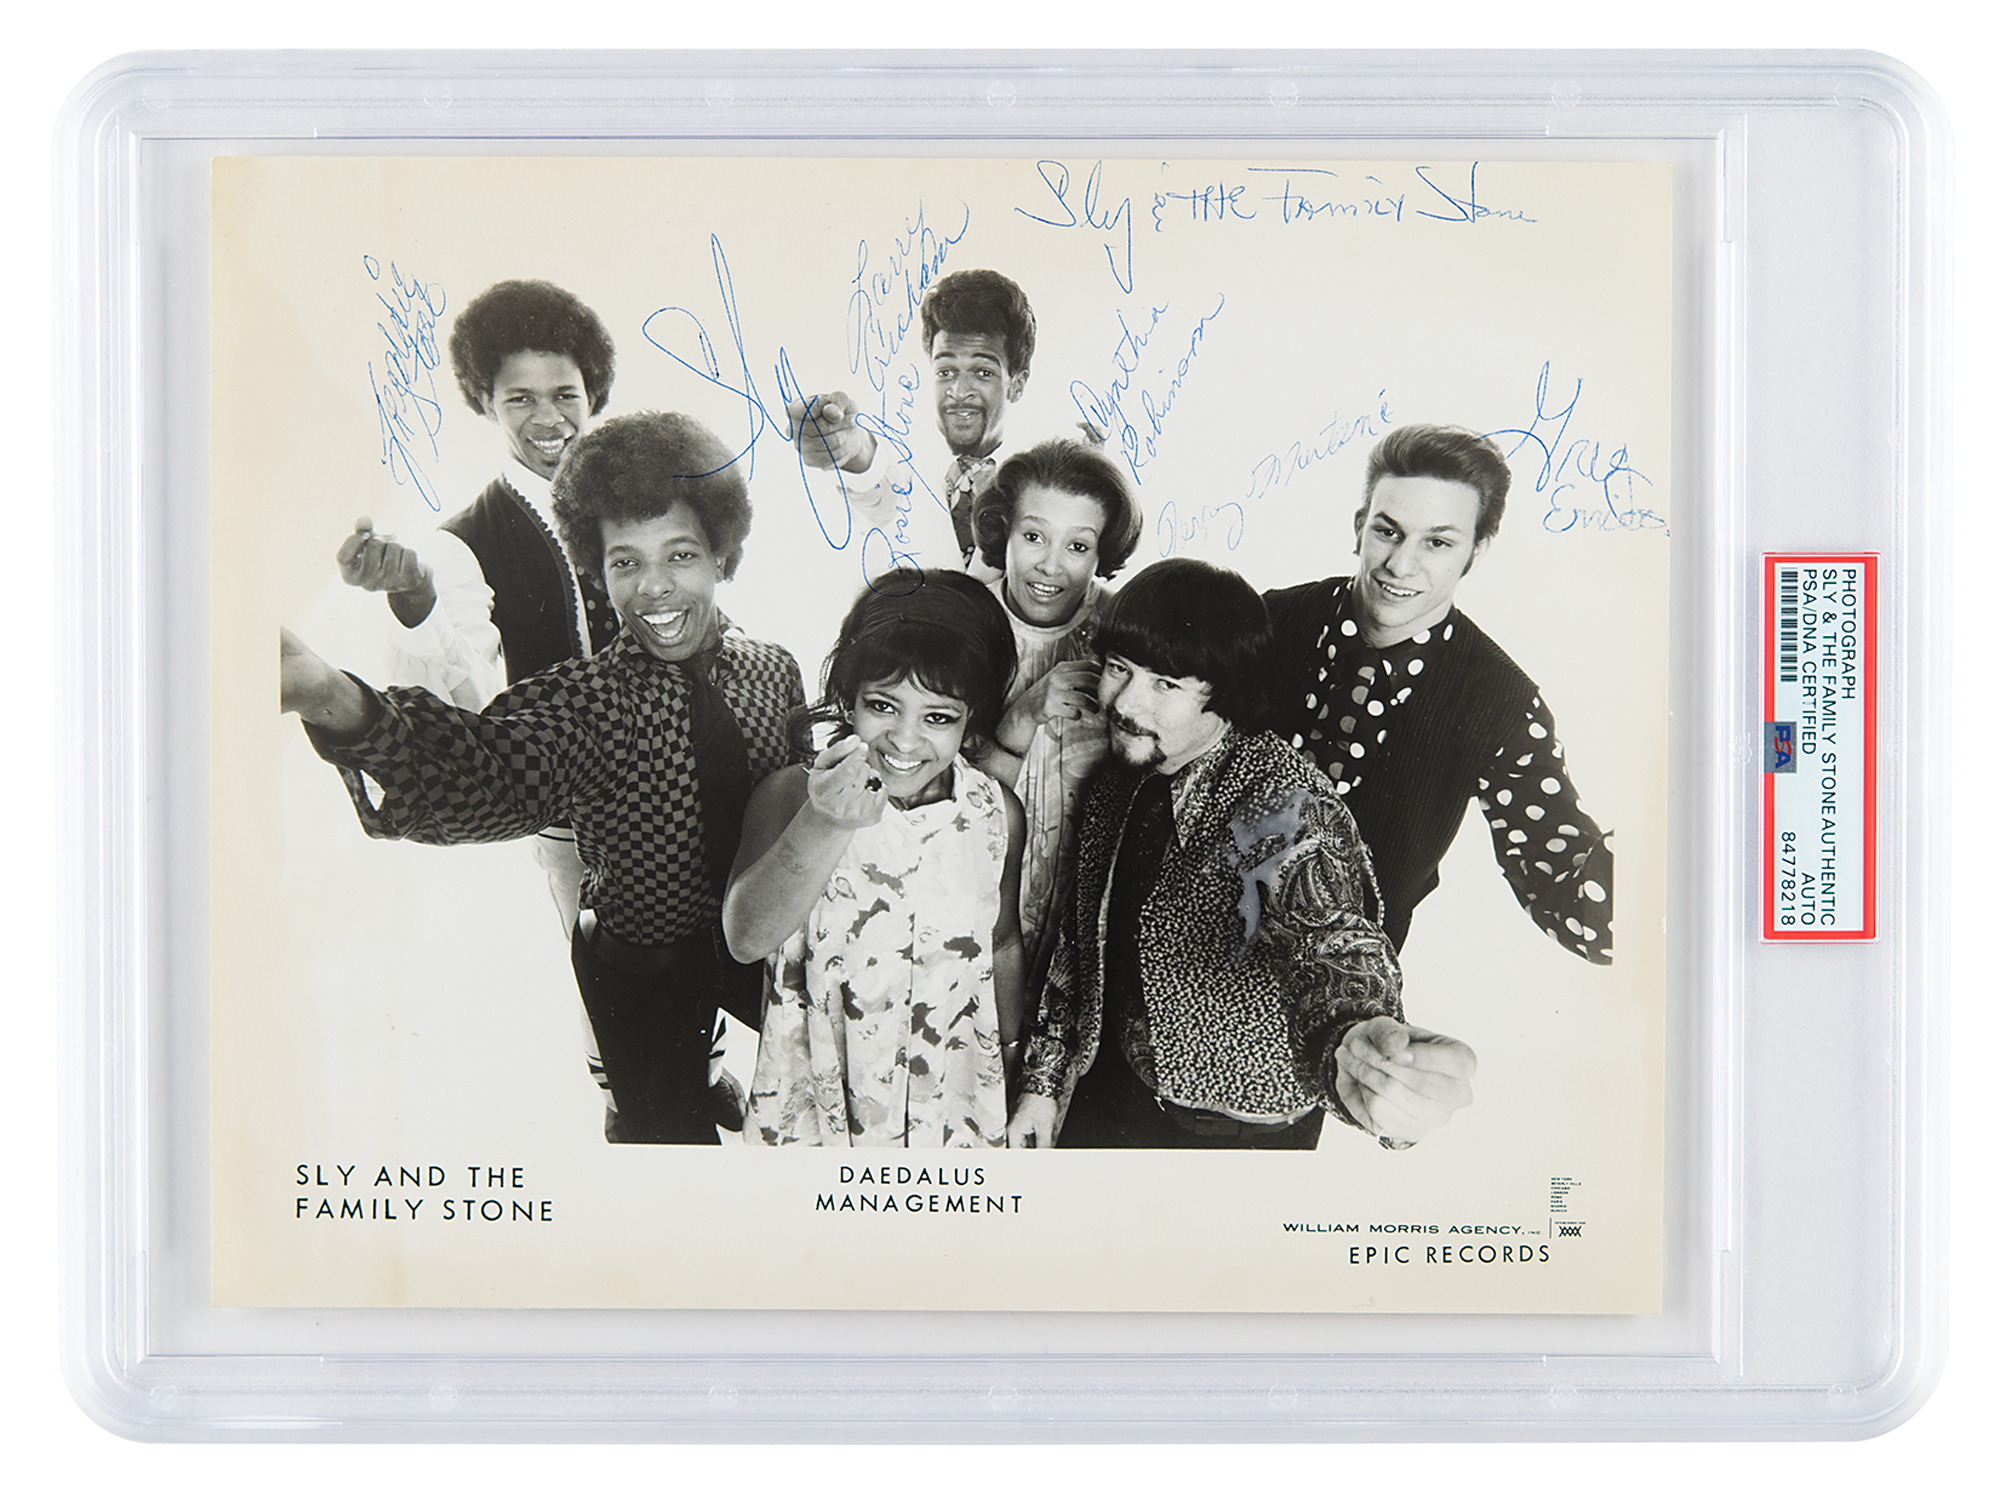 Lot #7360 Sly and the Family Stone Signed Photograph